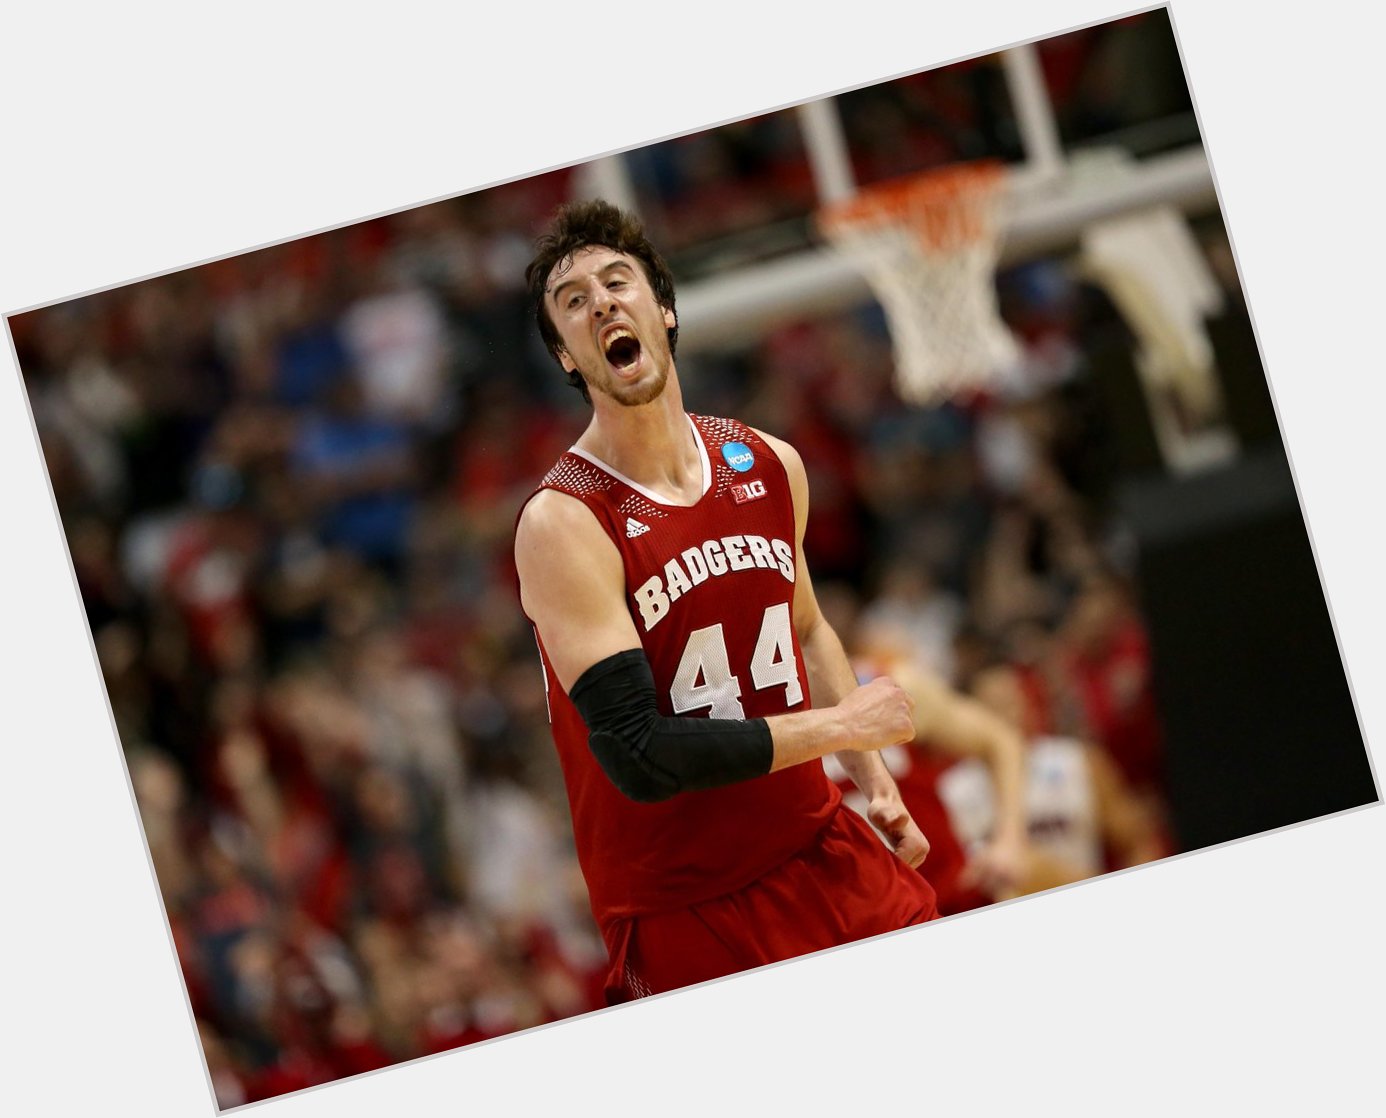   BREAKING: Wisconsin F Frank Kaminsky is named AP Player of the Year.  happy birthday to Frank too!